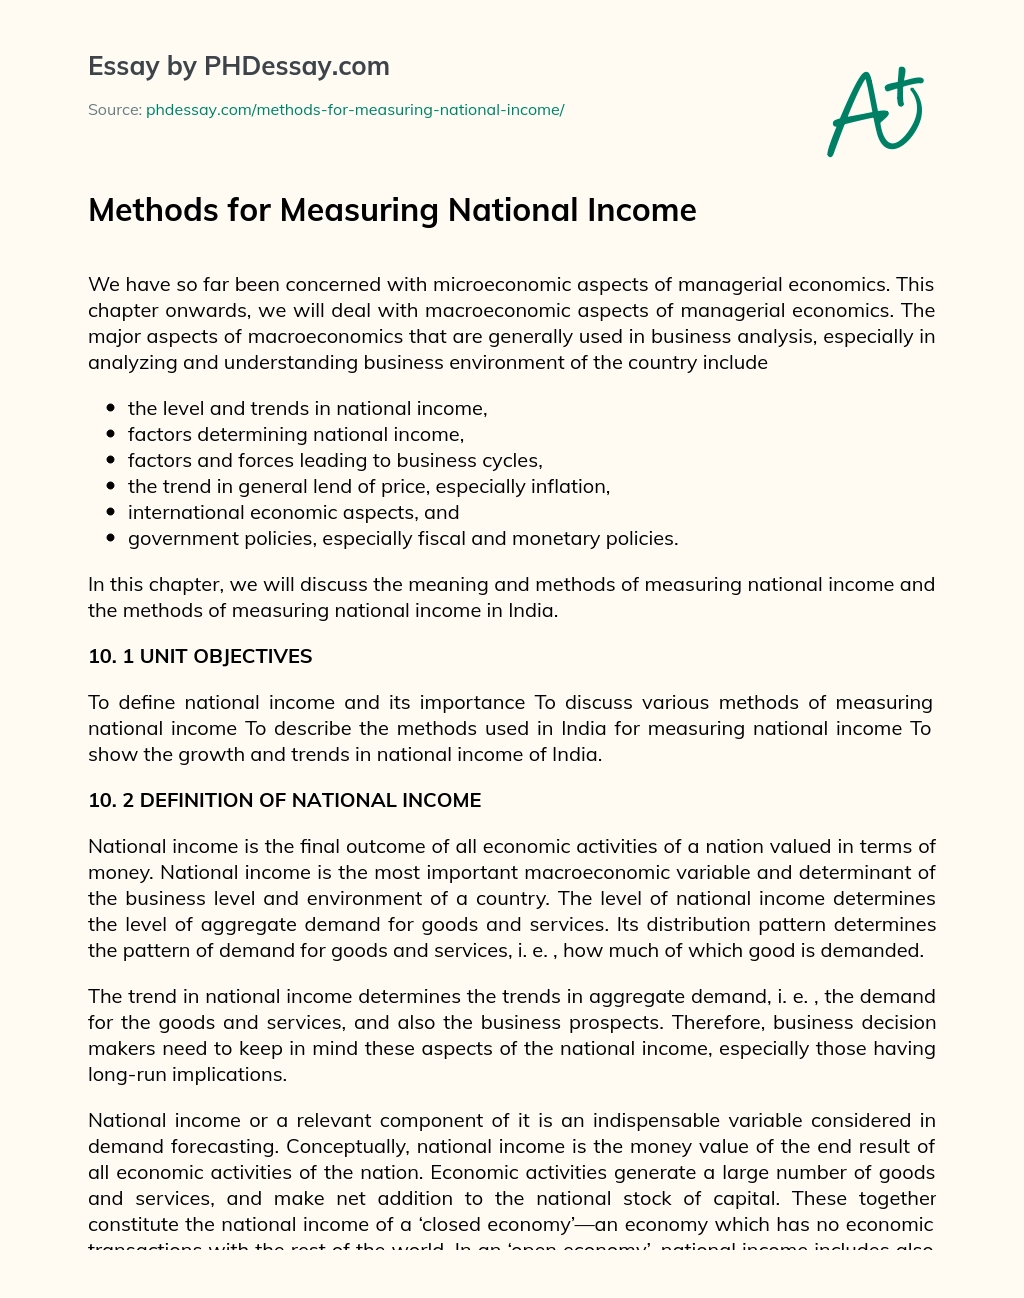 Methods for Measuring National Income essay